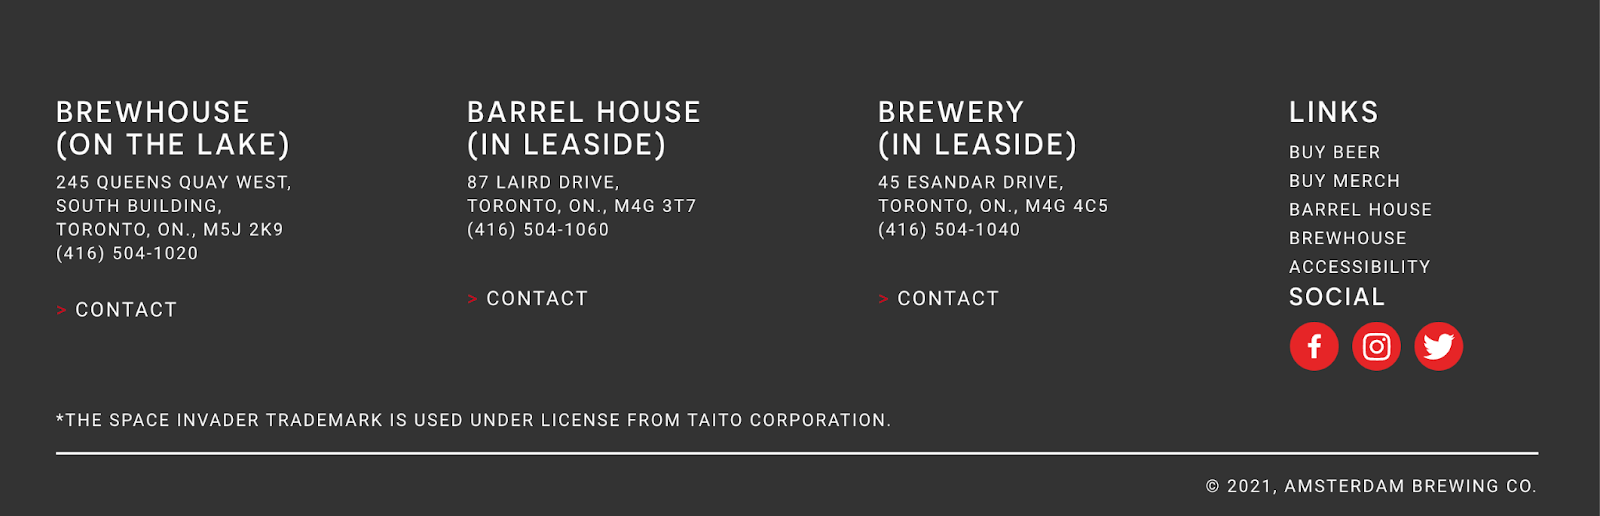 Amsterdam Brewing Company website footer with the contact information for all of their locations.